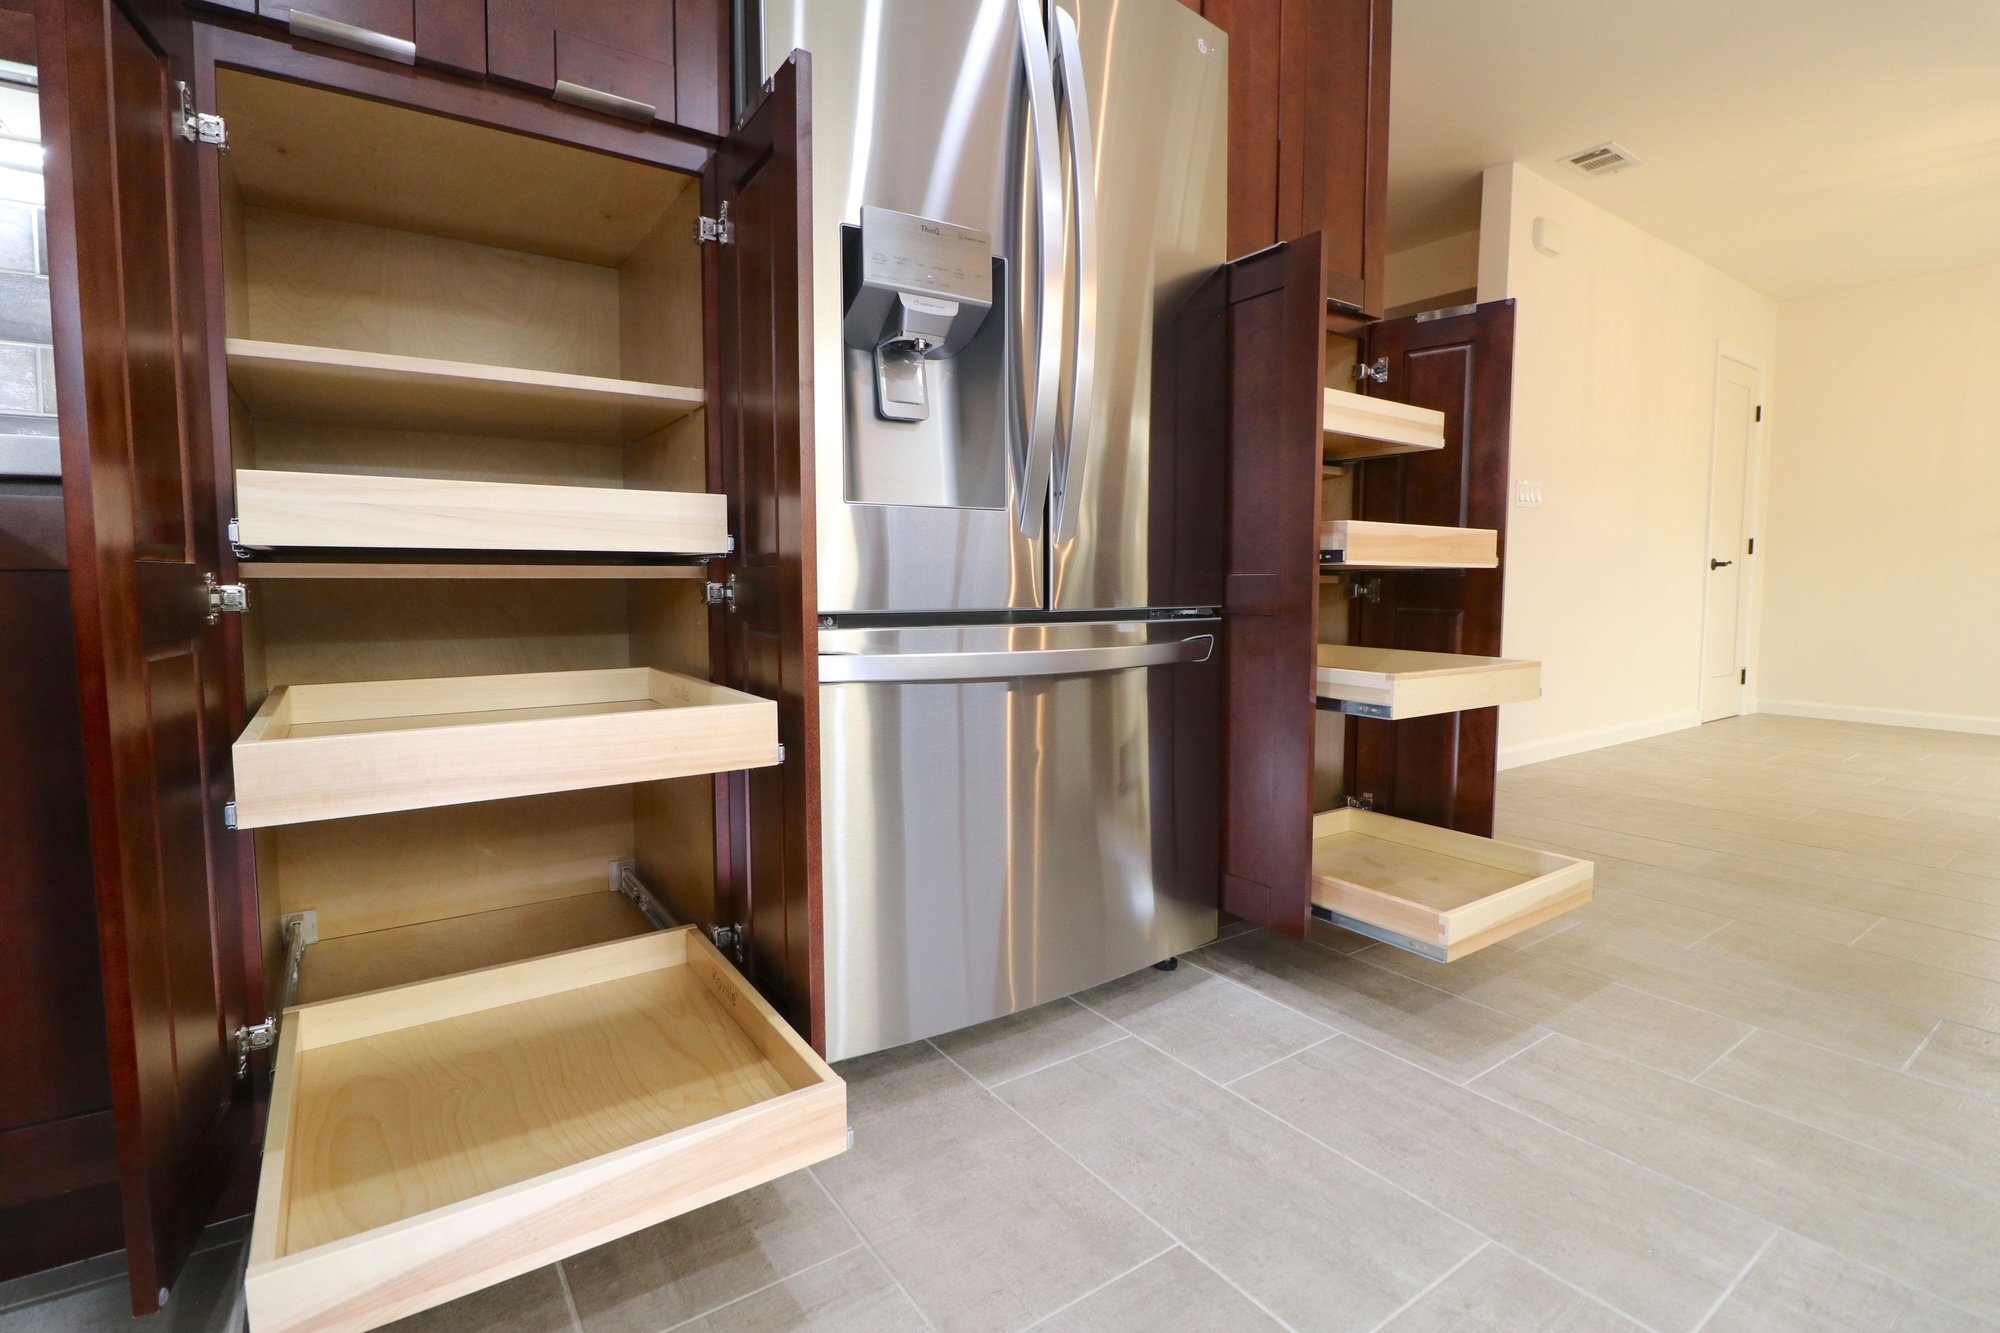 Redondo Beach Kitchen - best general contractor - pantry drawers